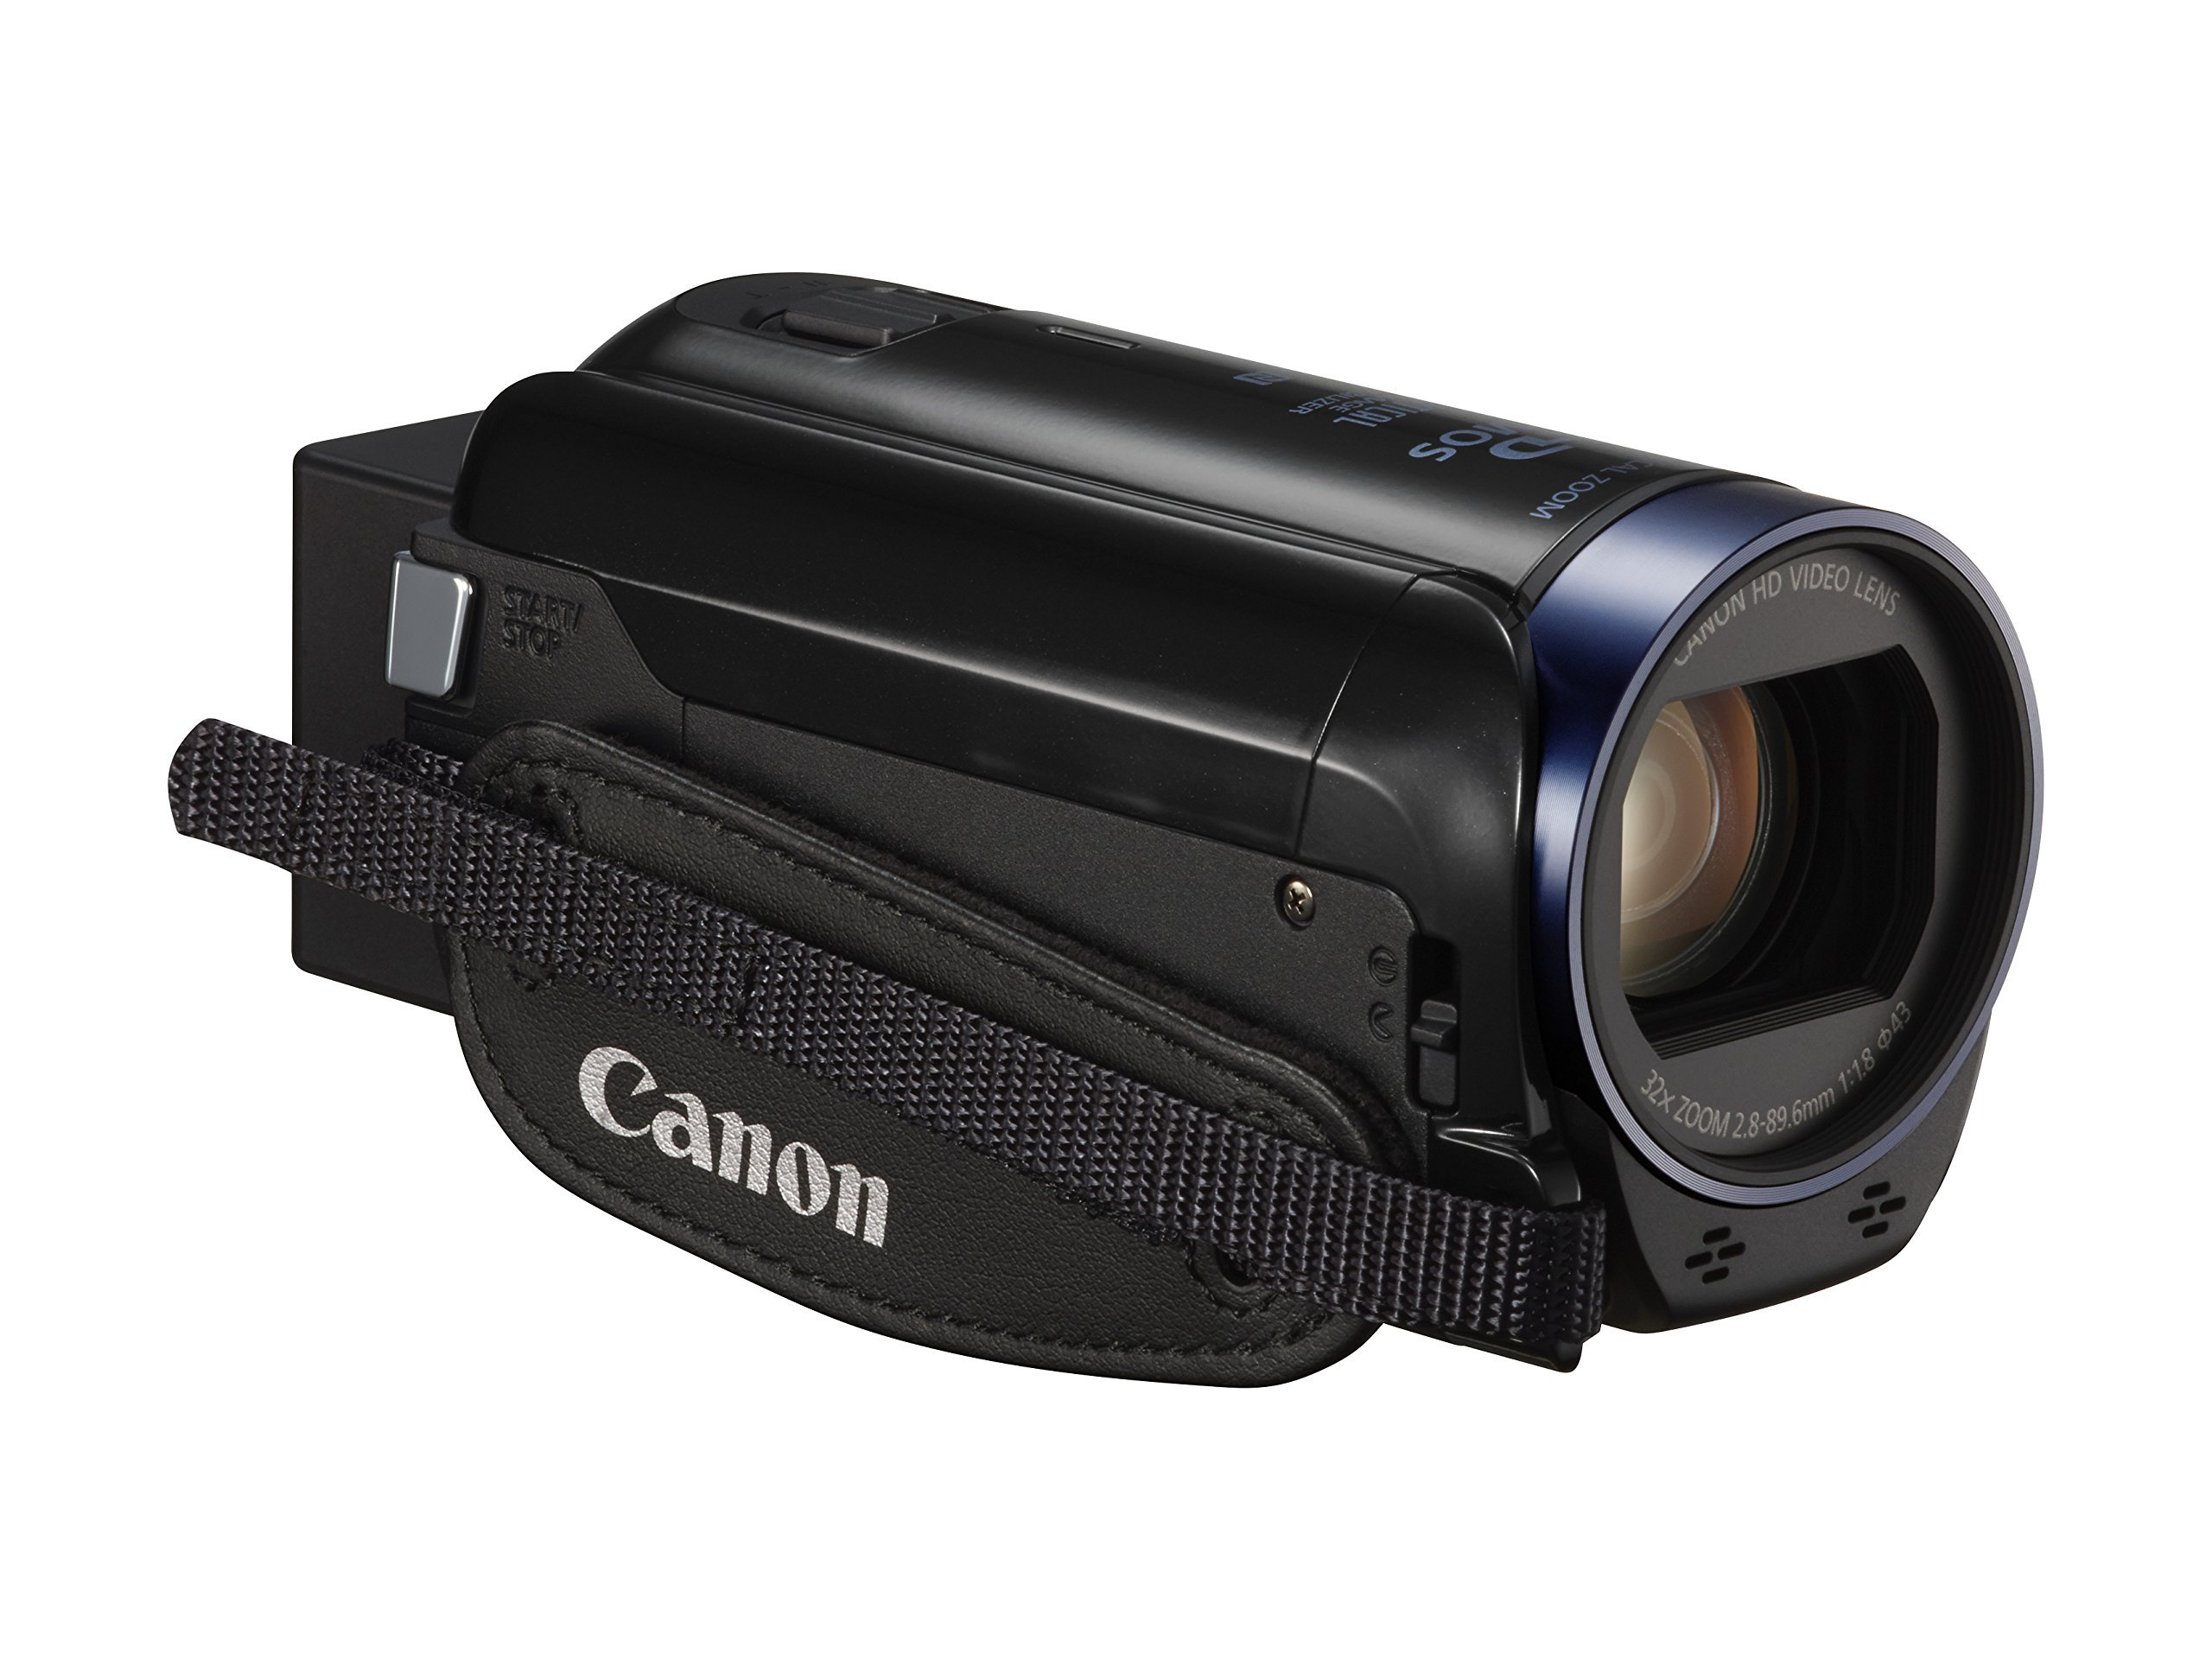 Canon 0278C004-cr VIXIA HF R62 (Discontinued by Manufacturer) Black (Renewed)